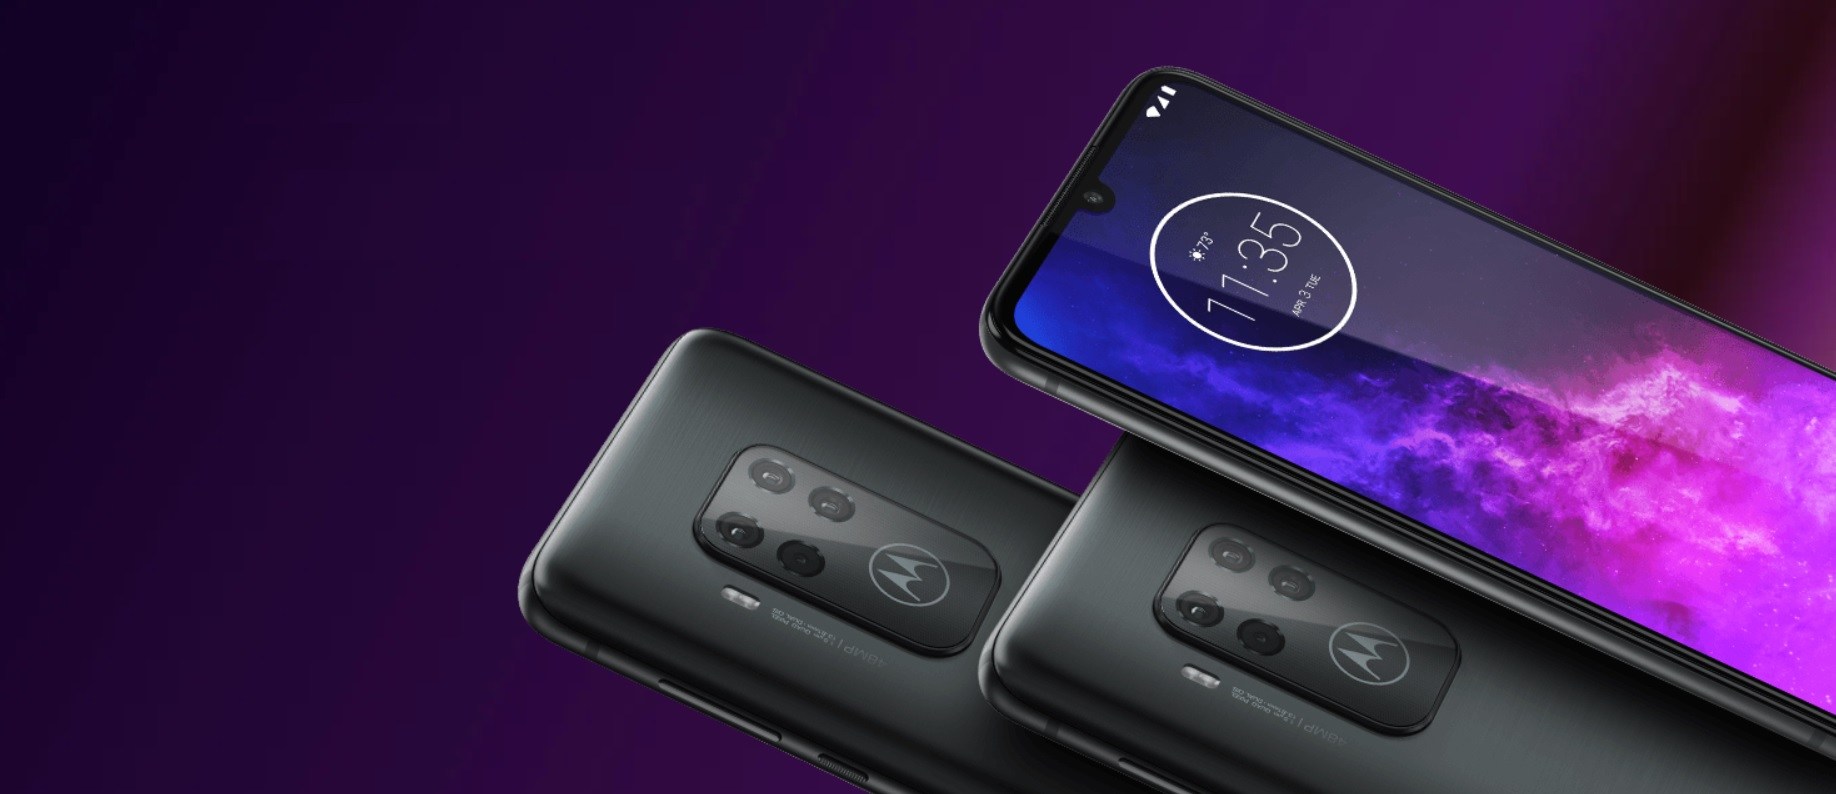 Motorola One Zoom: The new member of the Motorola One family arrives with 4 cameras